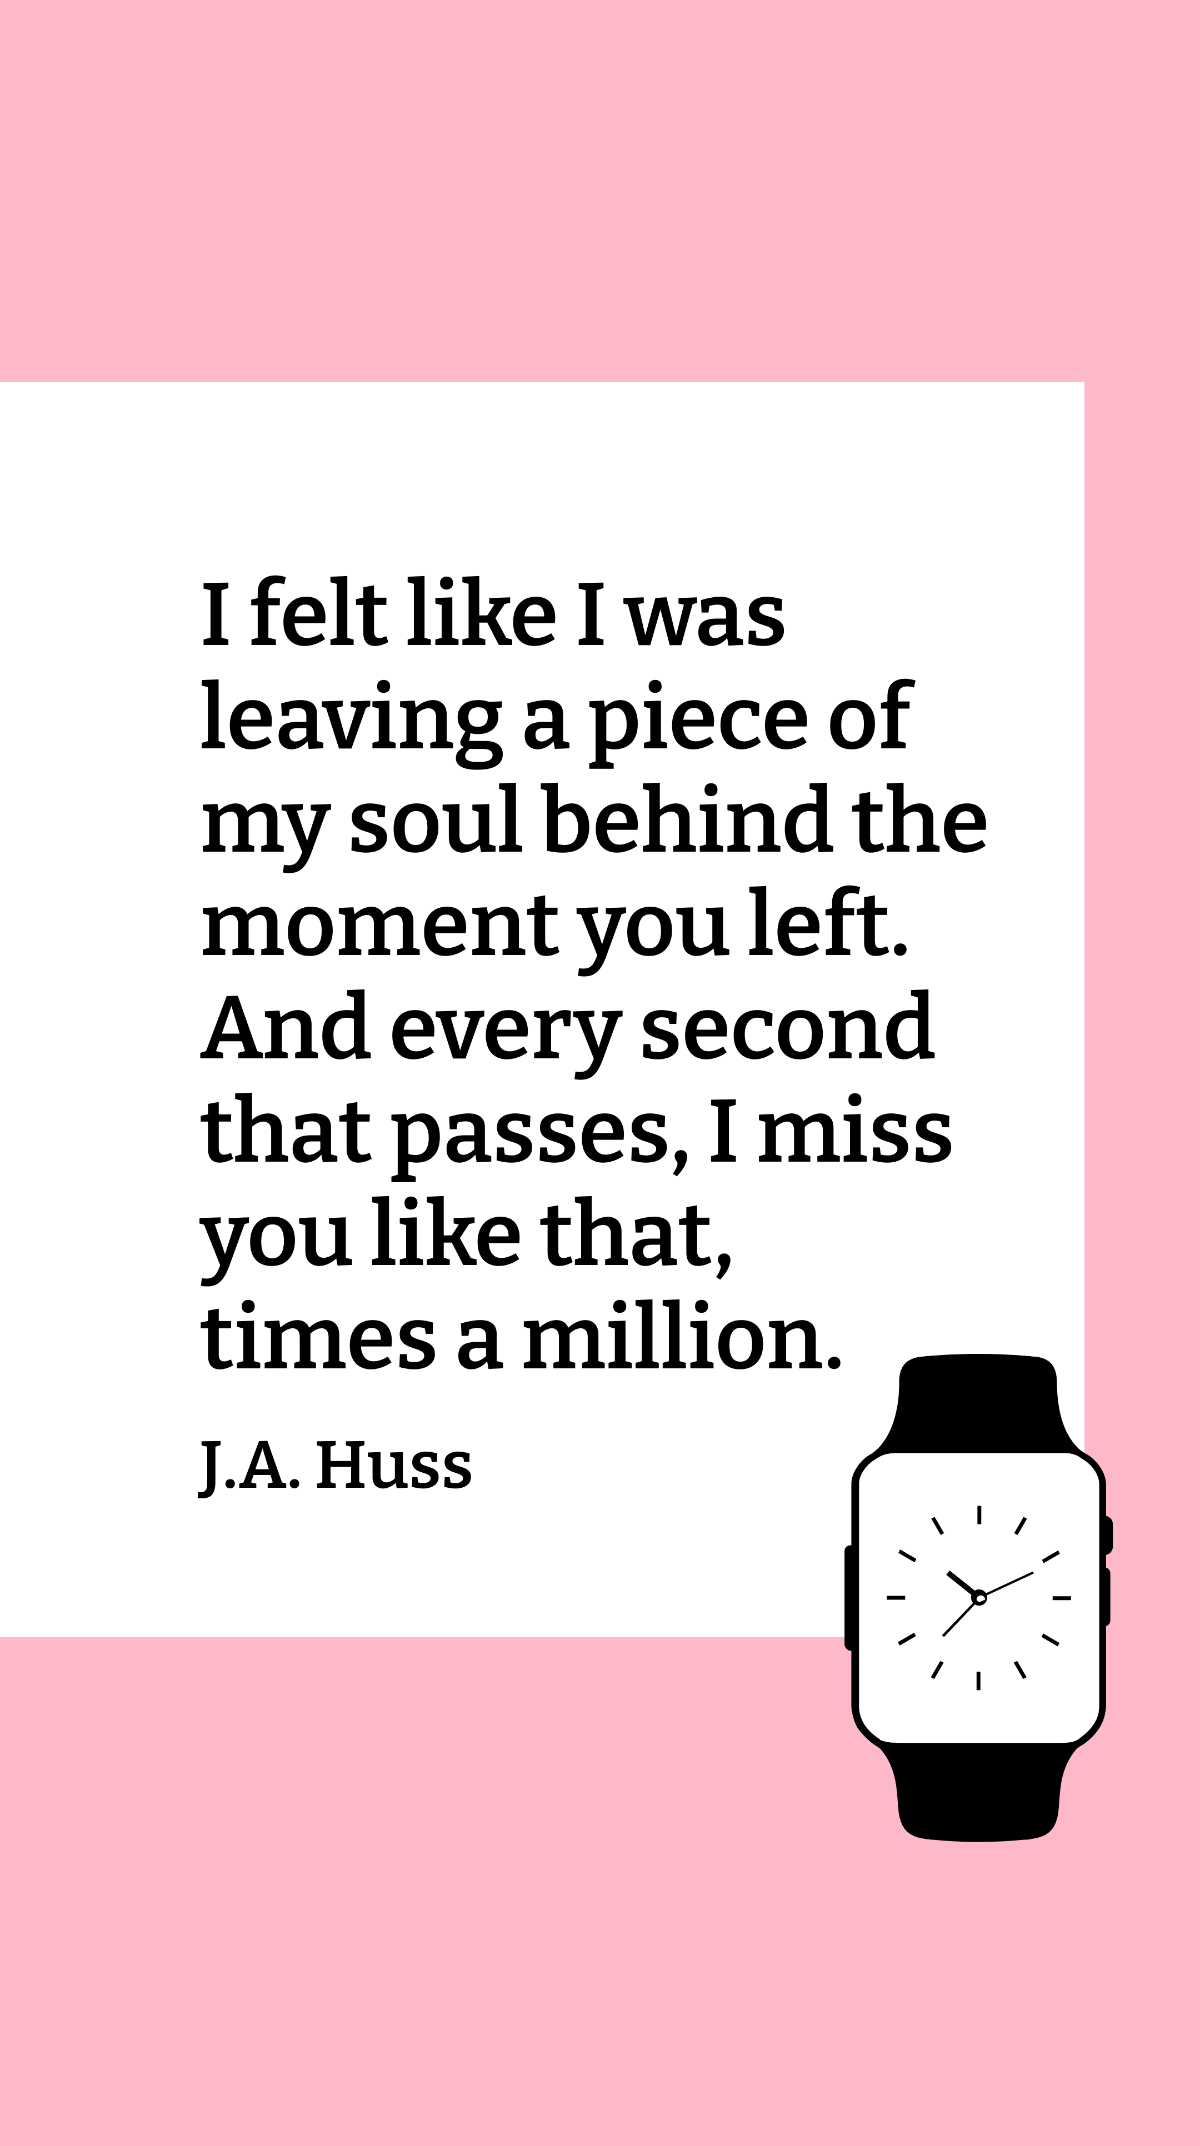 J.A. Huss - I felt like I was leaving a piece of my soul behind the moment you left. And every second that passes, I miss you like that, times a million. Template